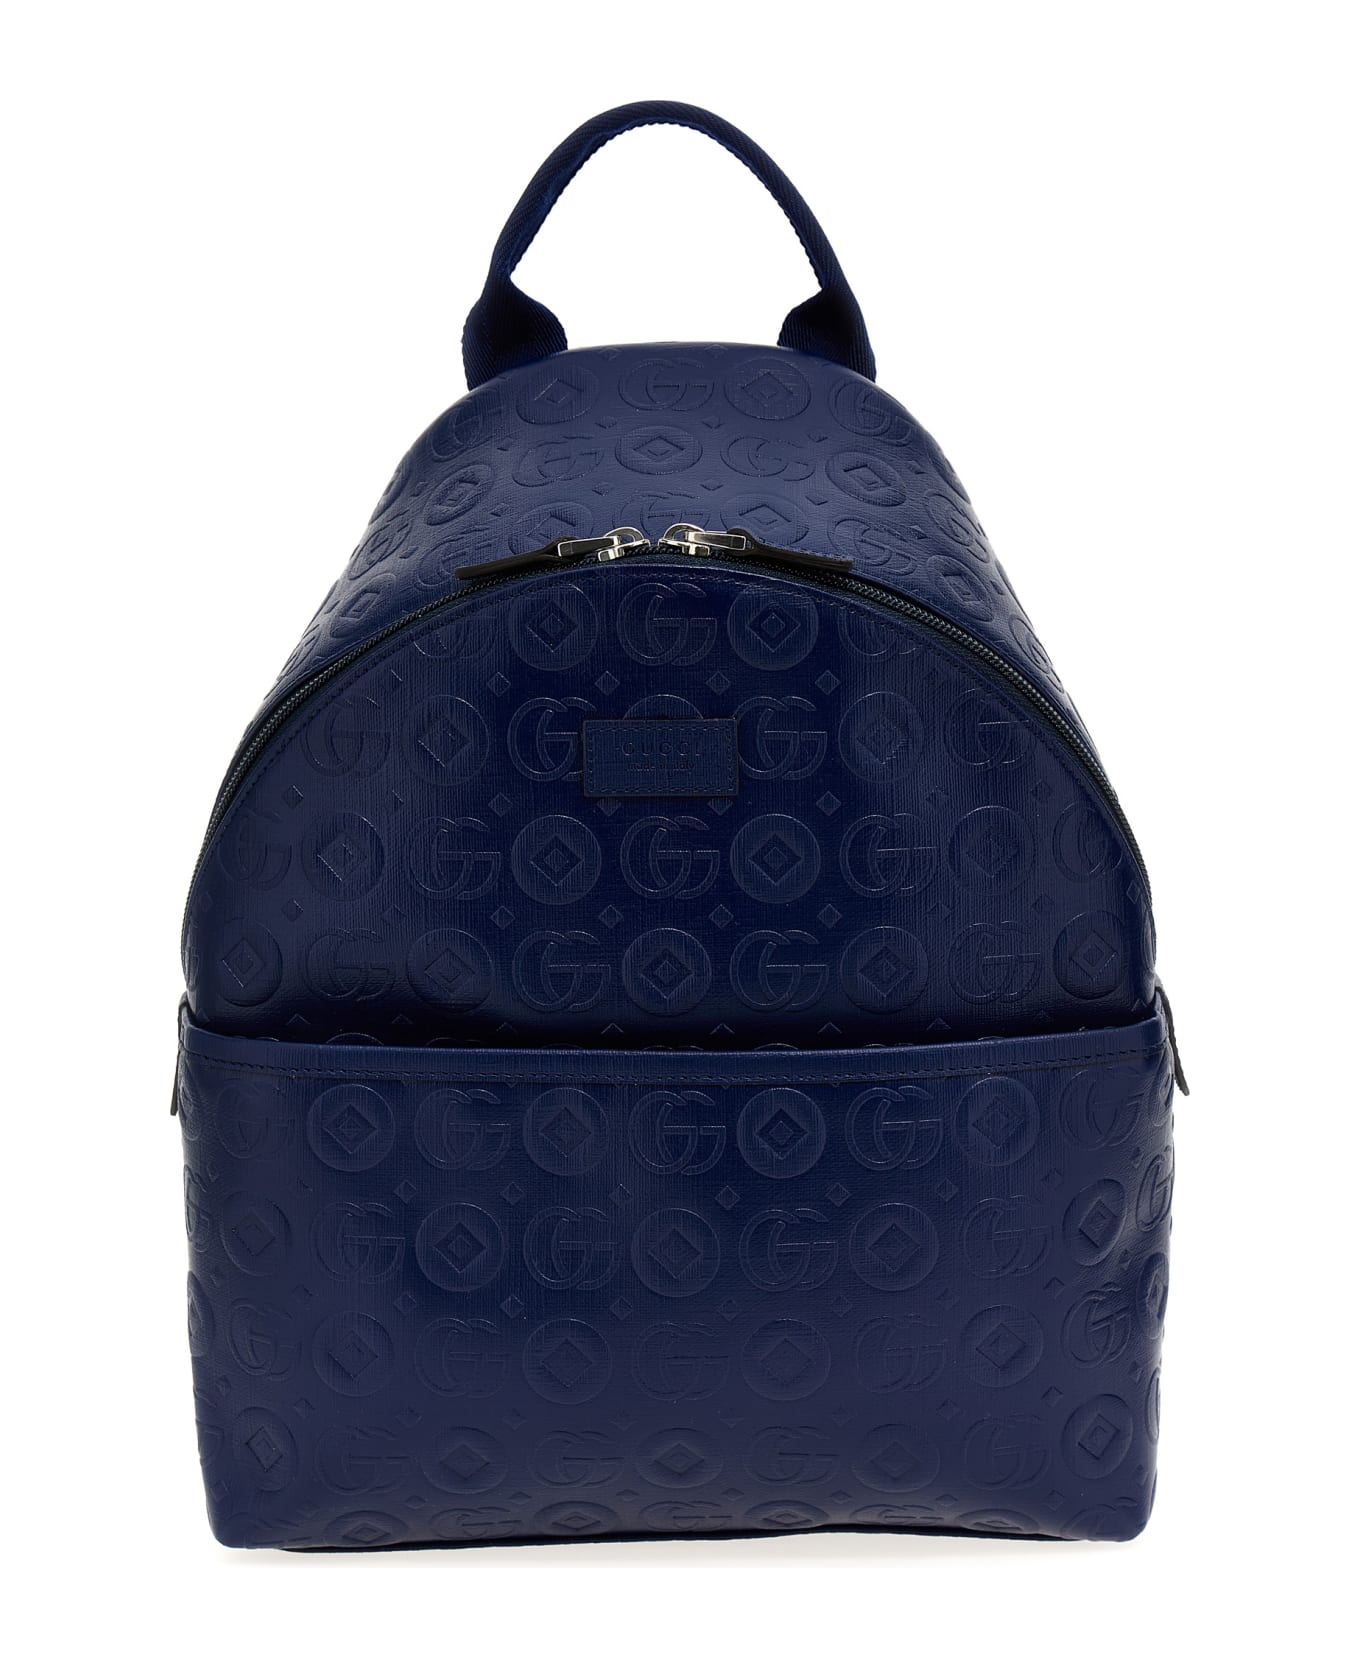 Gucci 'double G' Backpack - NAVY アクセサリー＆ギフト